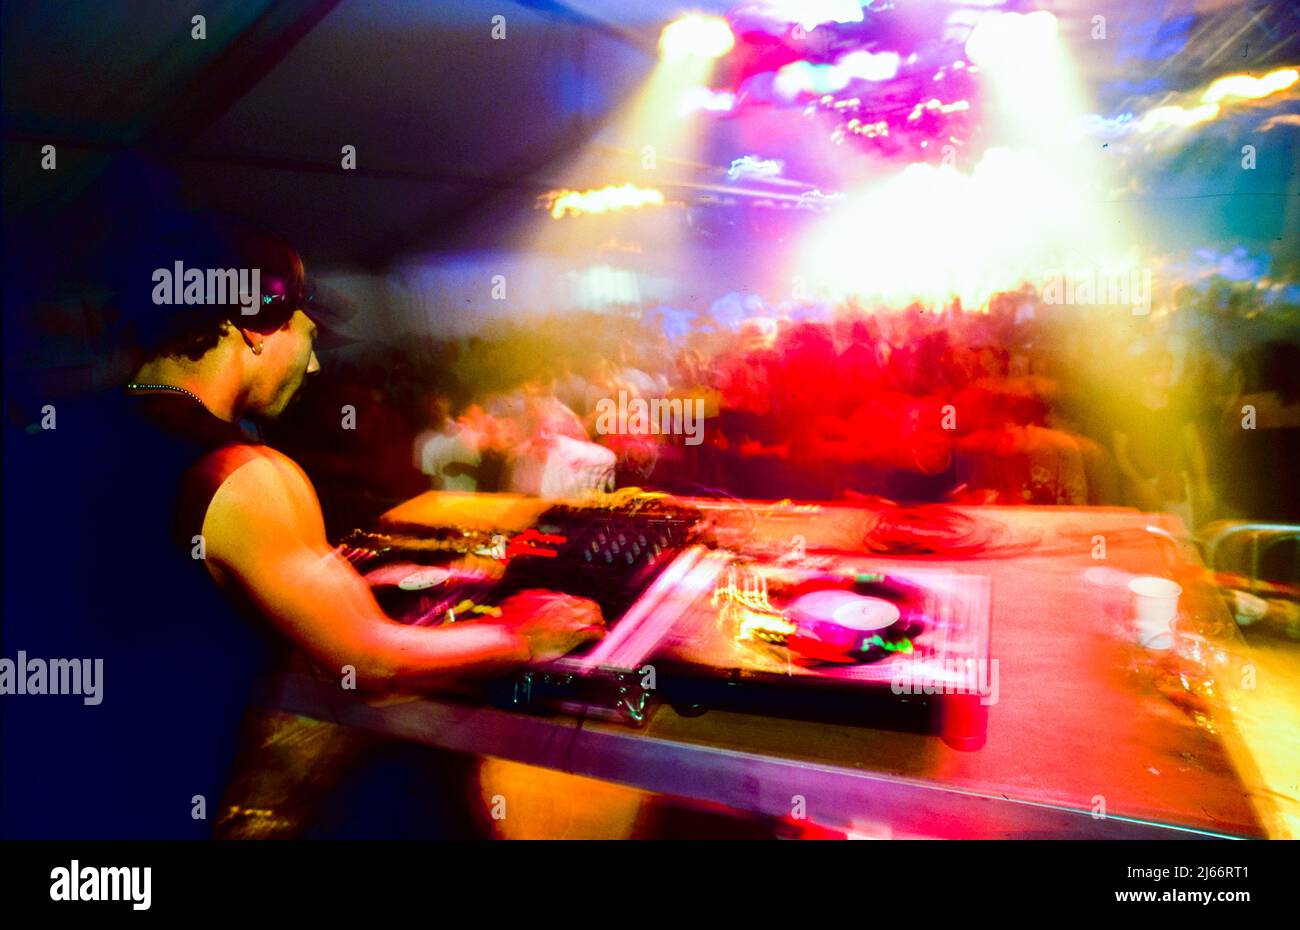 Paris, France, Crowd Dancing in Nightclub with D.J. Spinning Stock Photo